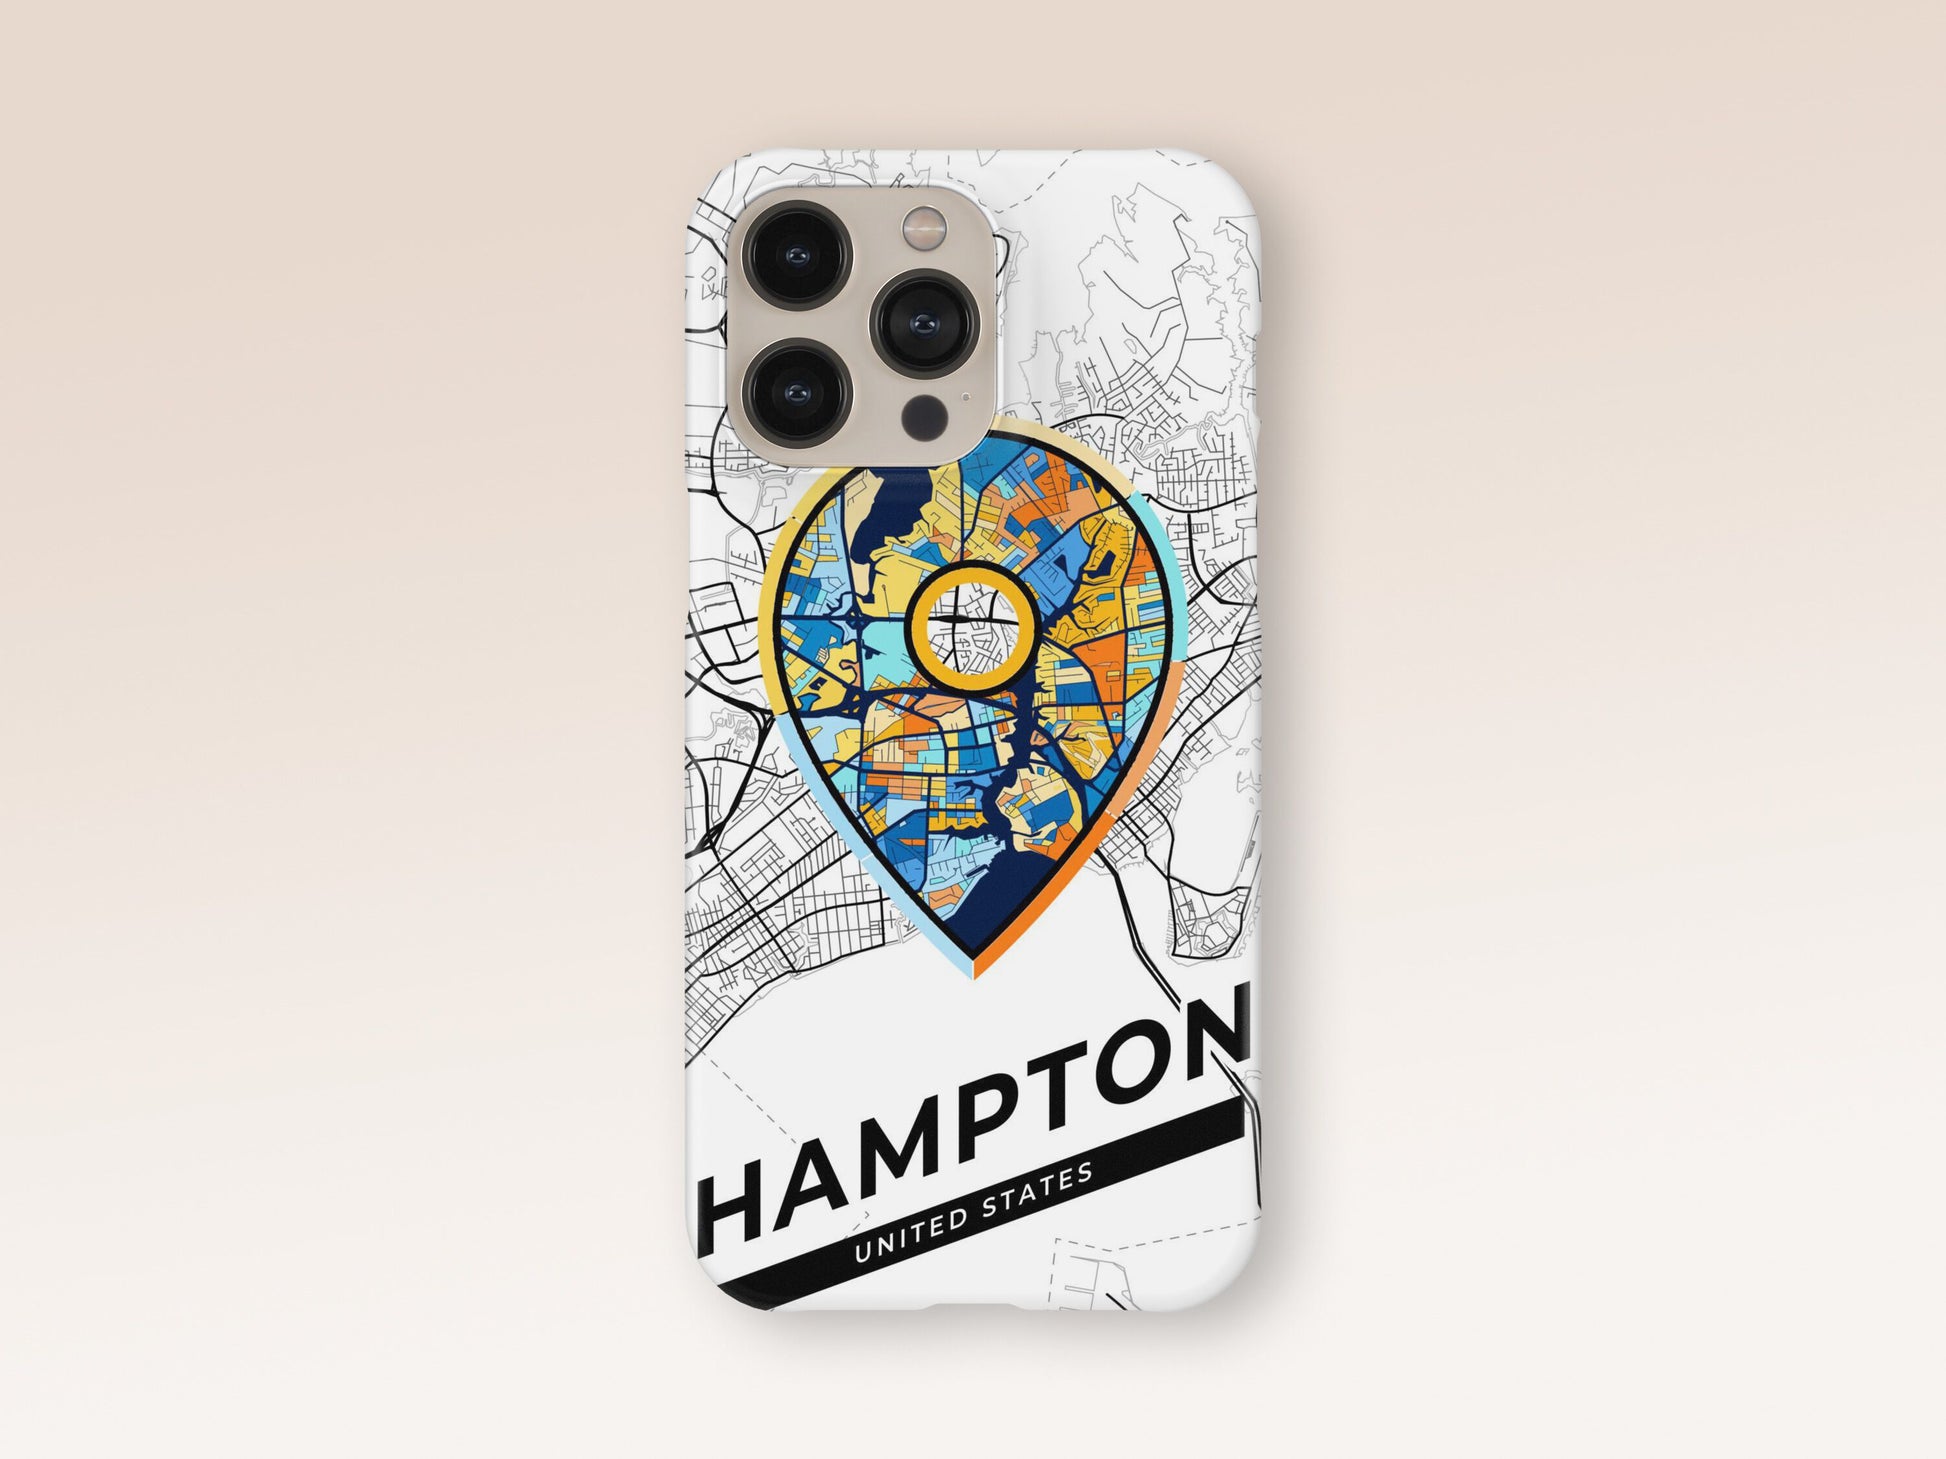 Hampton Virginia slim phone case with colorful icon. Birthday, wedding or housewarming gift. Couple match cases. 1